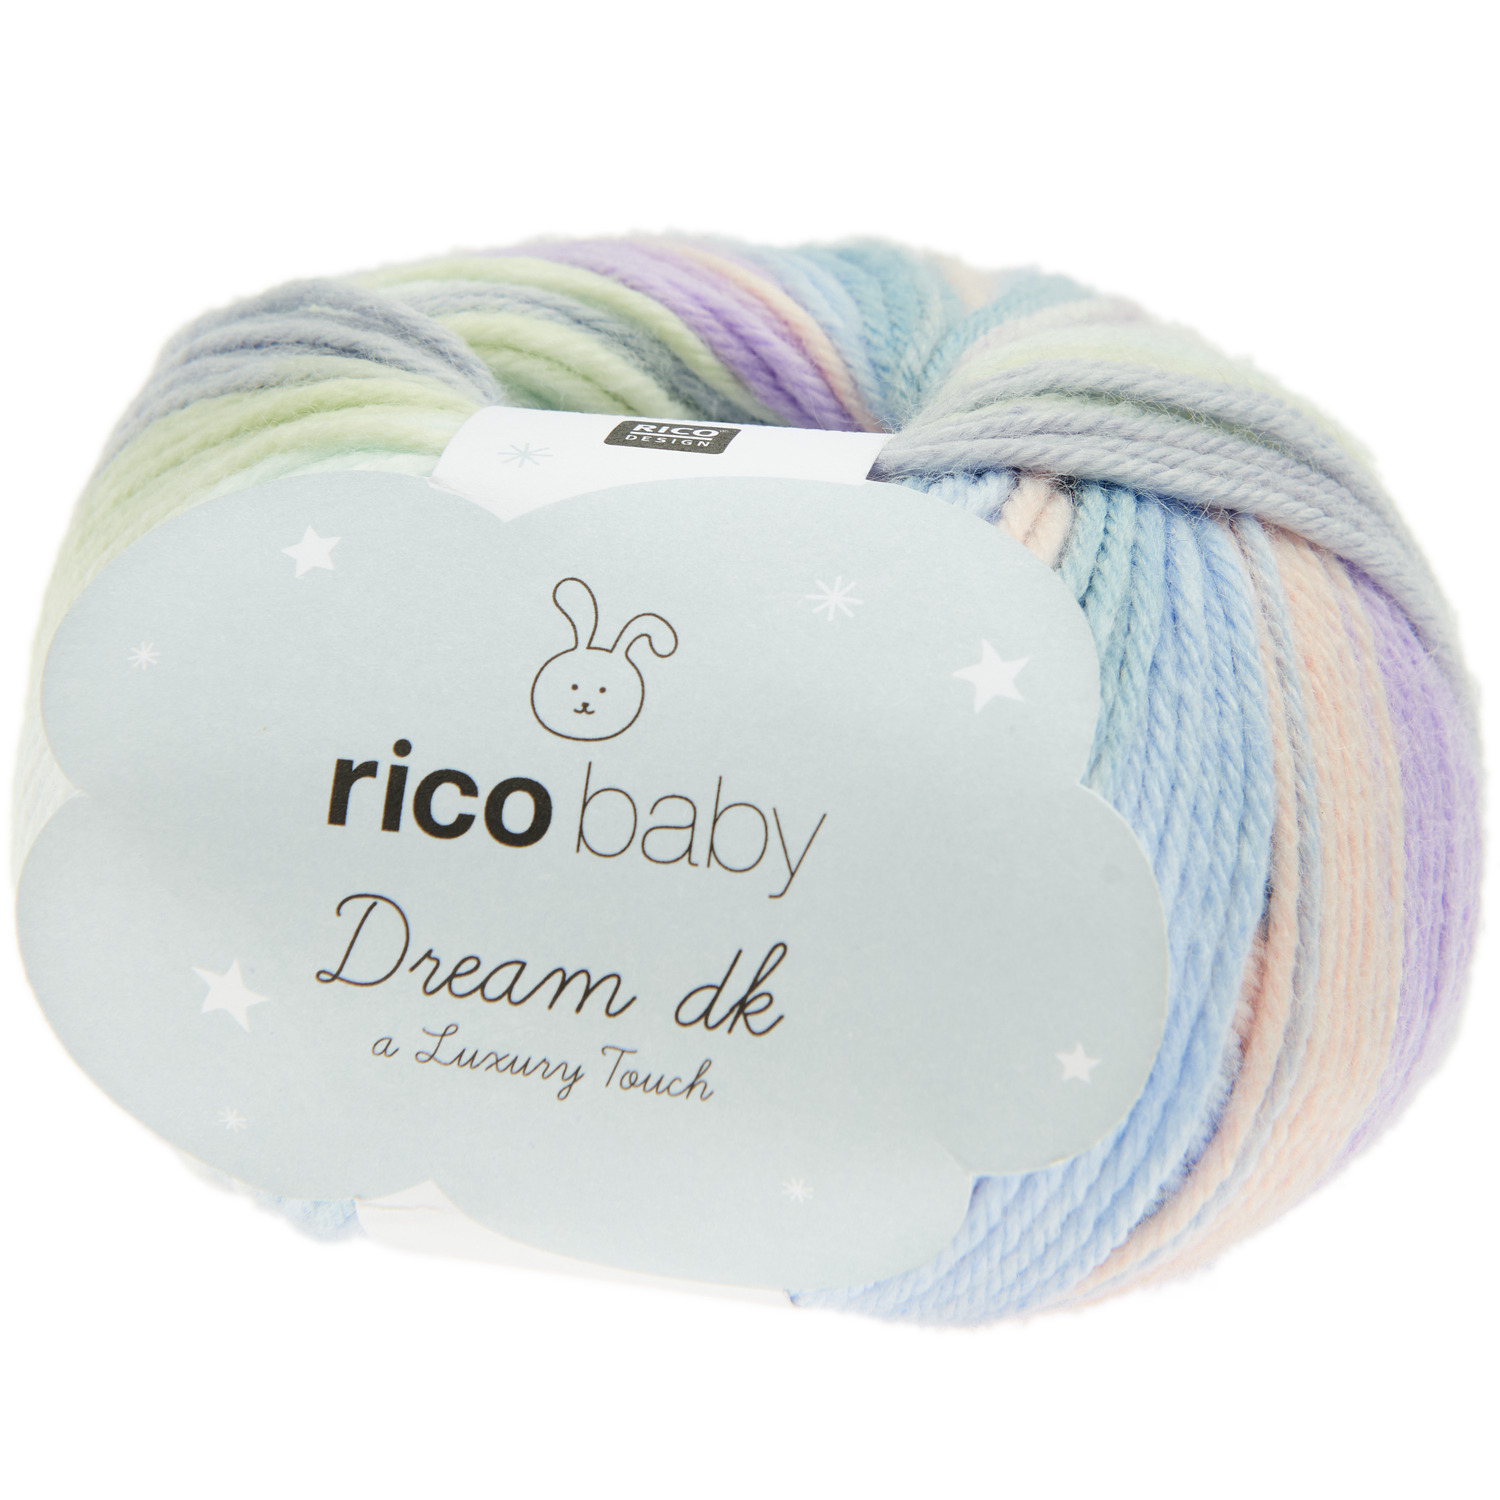 Rico Baby Dream dk A Luxury Touch